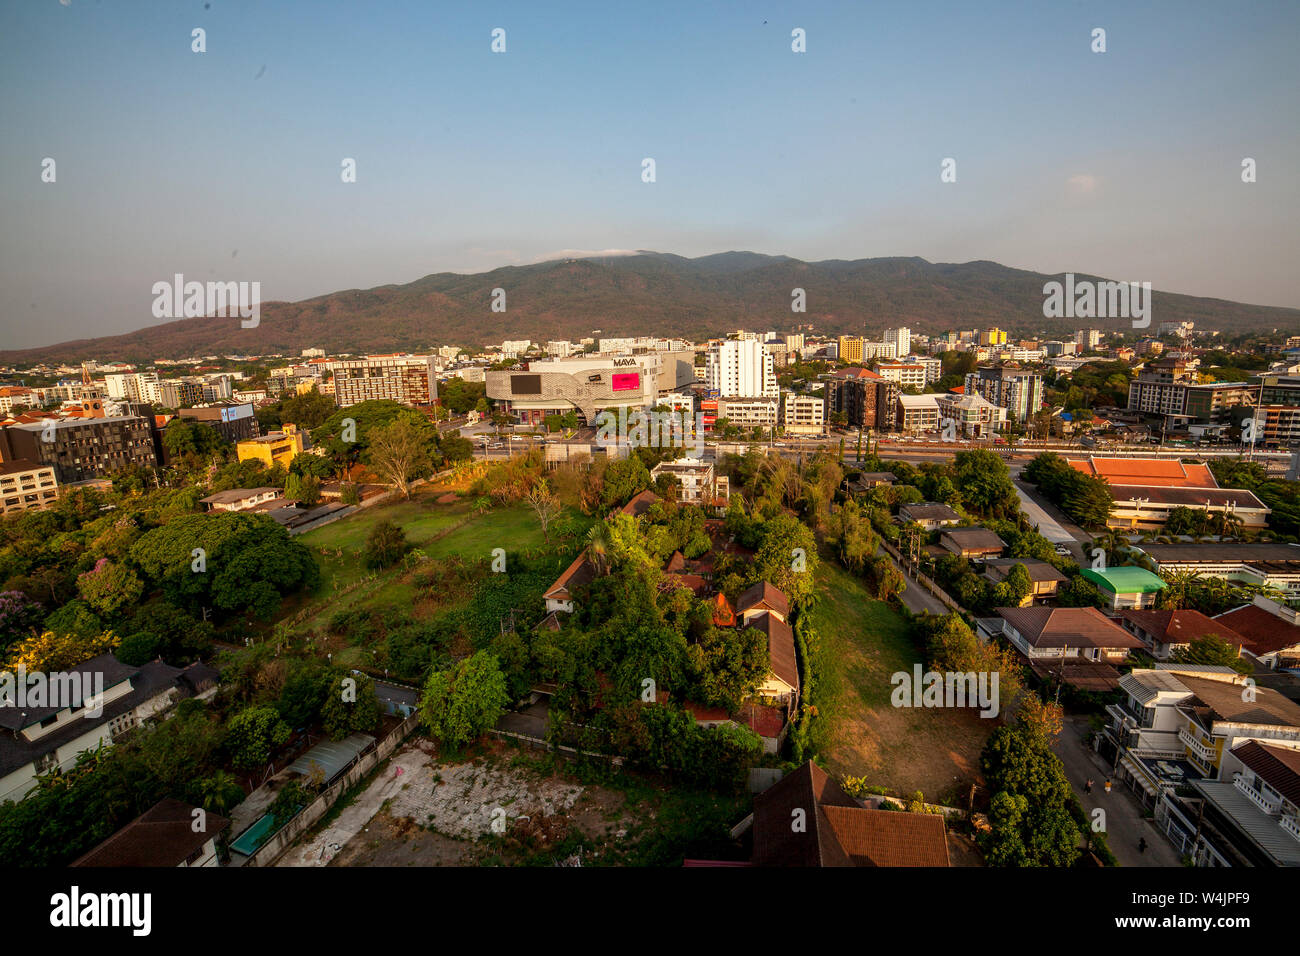 The city of Chiang Mai in Northern Thailand is surrounded by mountains. Stock Photo